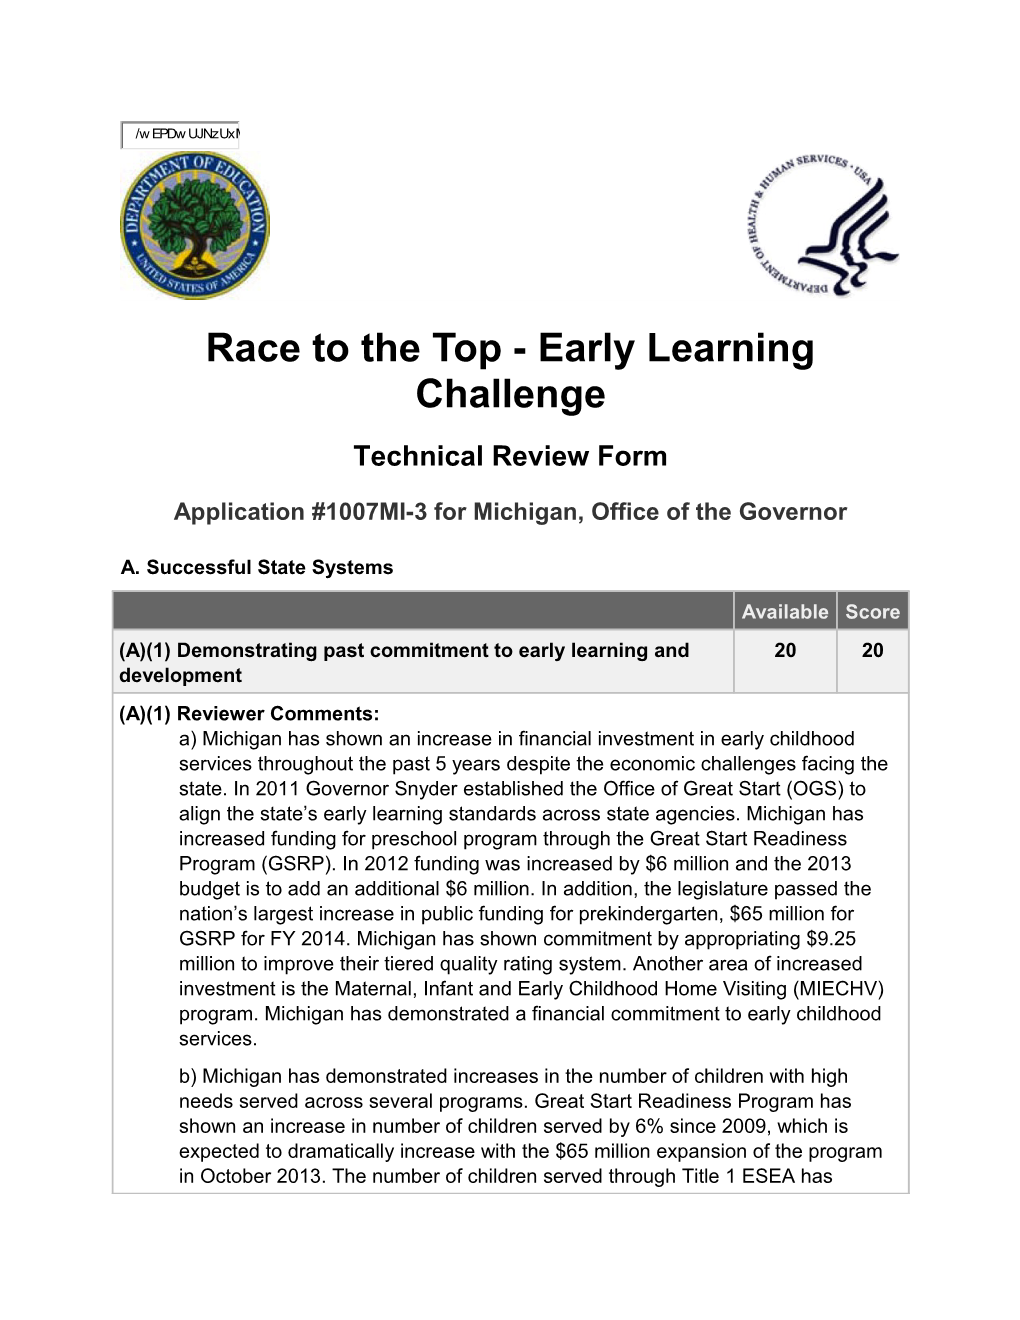 Score Sheet for Phase 3, Race to the Top-Early Learning Challenge, Application for Initial